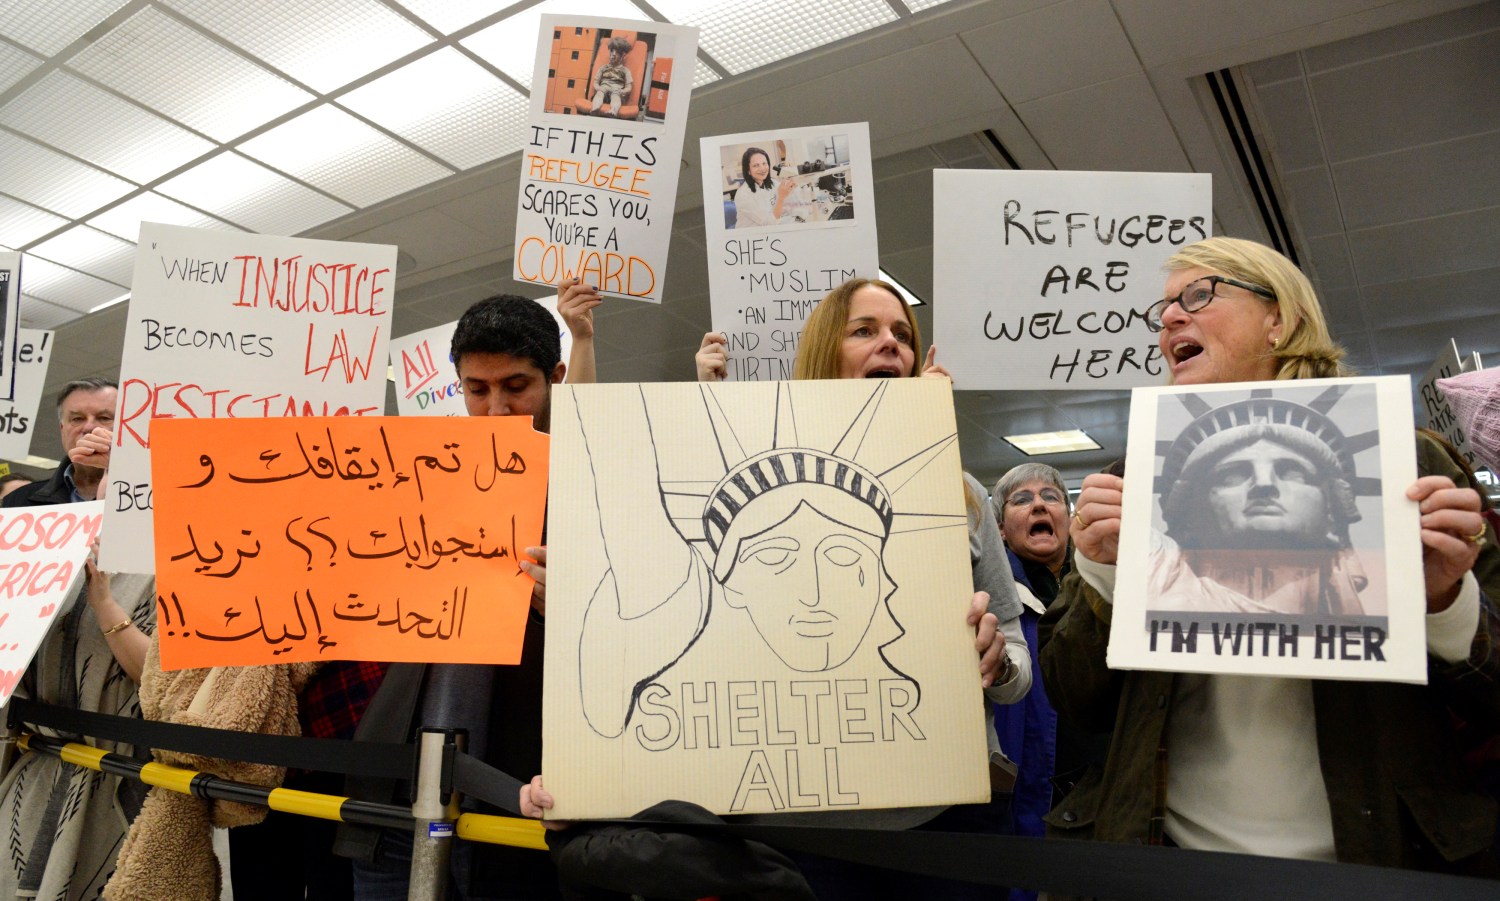 Dozens of pro-immigration demonstrators cheer and hold signs as international passengers arrive at Dulles International Airport, to protest President Donald Trump's executive order barring visitors, refugees and immigrants from certain countries to the United States, in Chantilly, Virginia, in suburban Washington, U.S., January 29, 2017. The sign in Arabic (L) reads "Have you been stopped and questioned, we would like to talk to you, to assist with a lawyer". REUTERS/Mike Theiler - RTSXYQ0